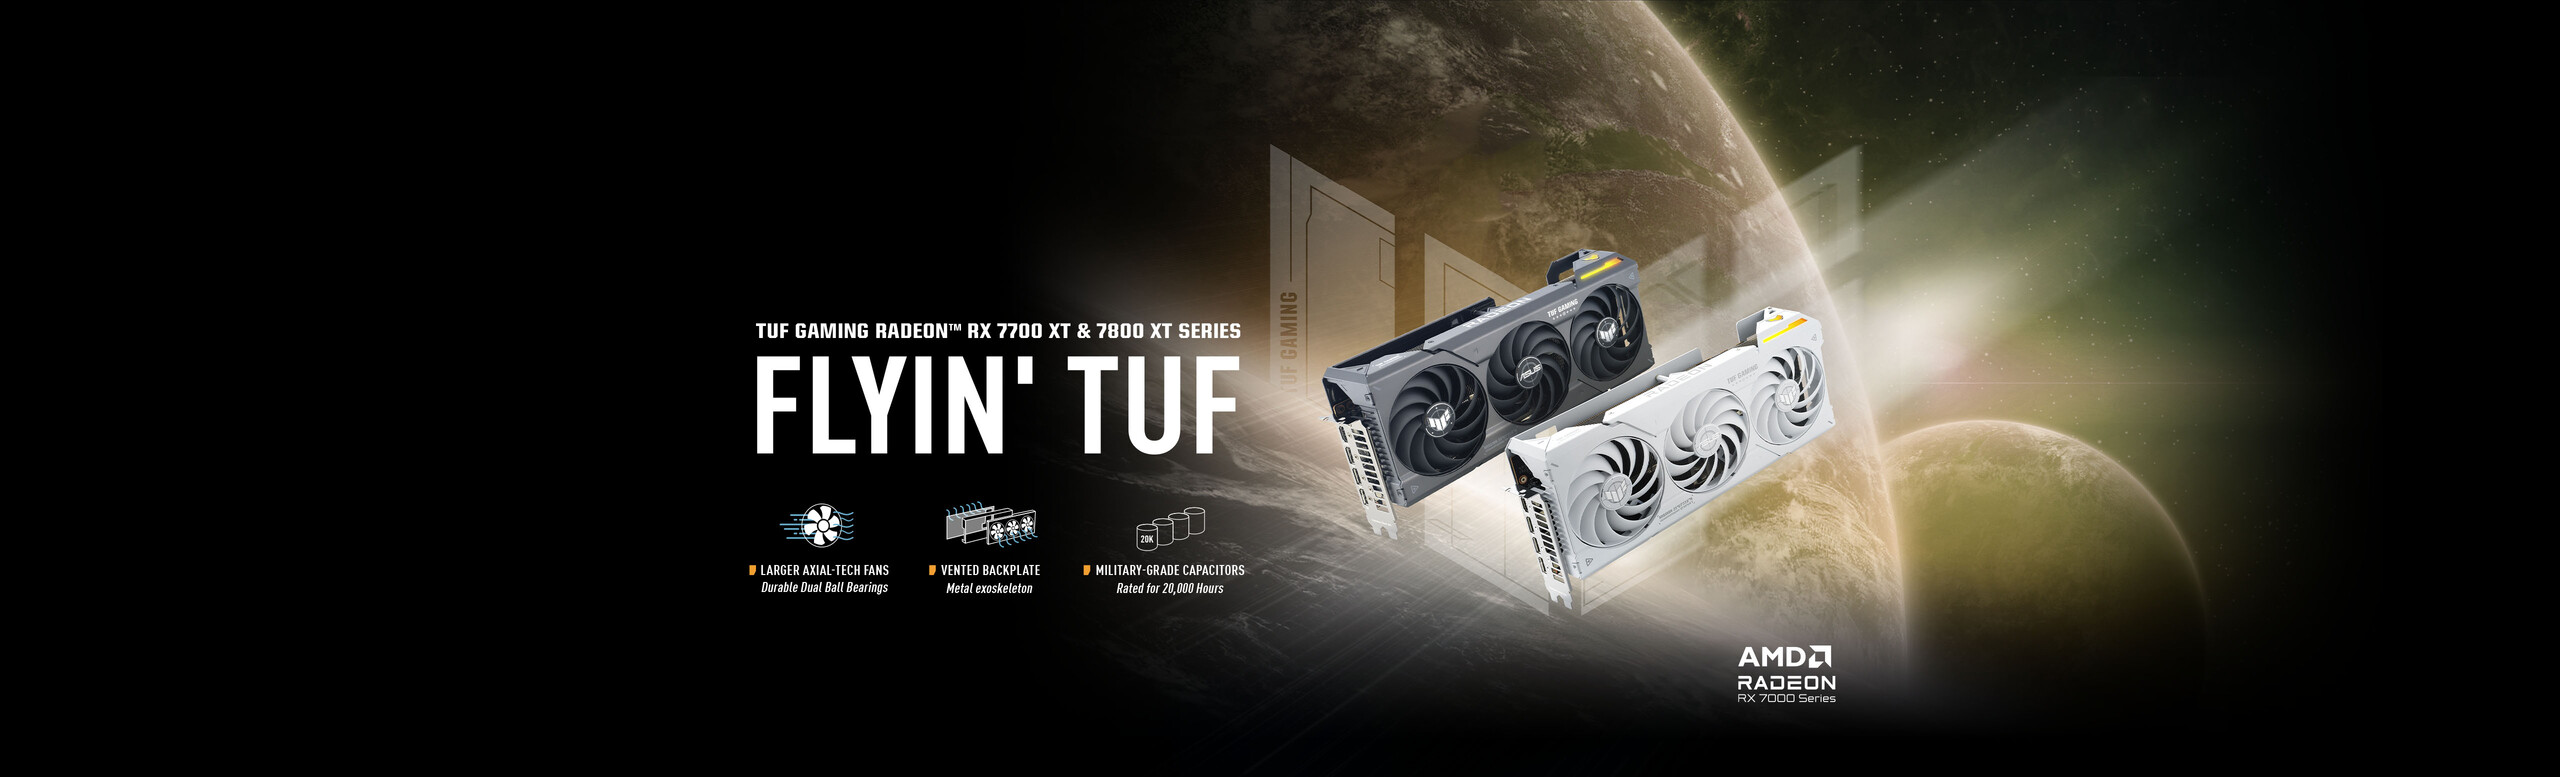 Image of TUF Gaming RX 7800 XT Black and White Edition graphics cards